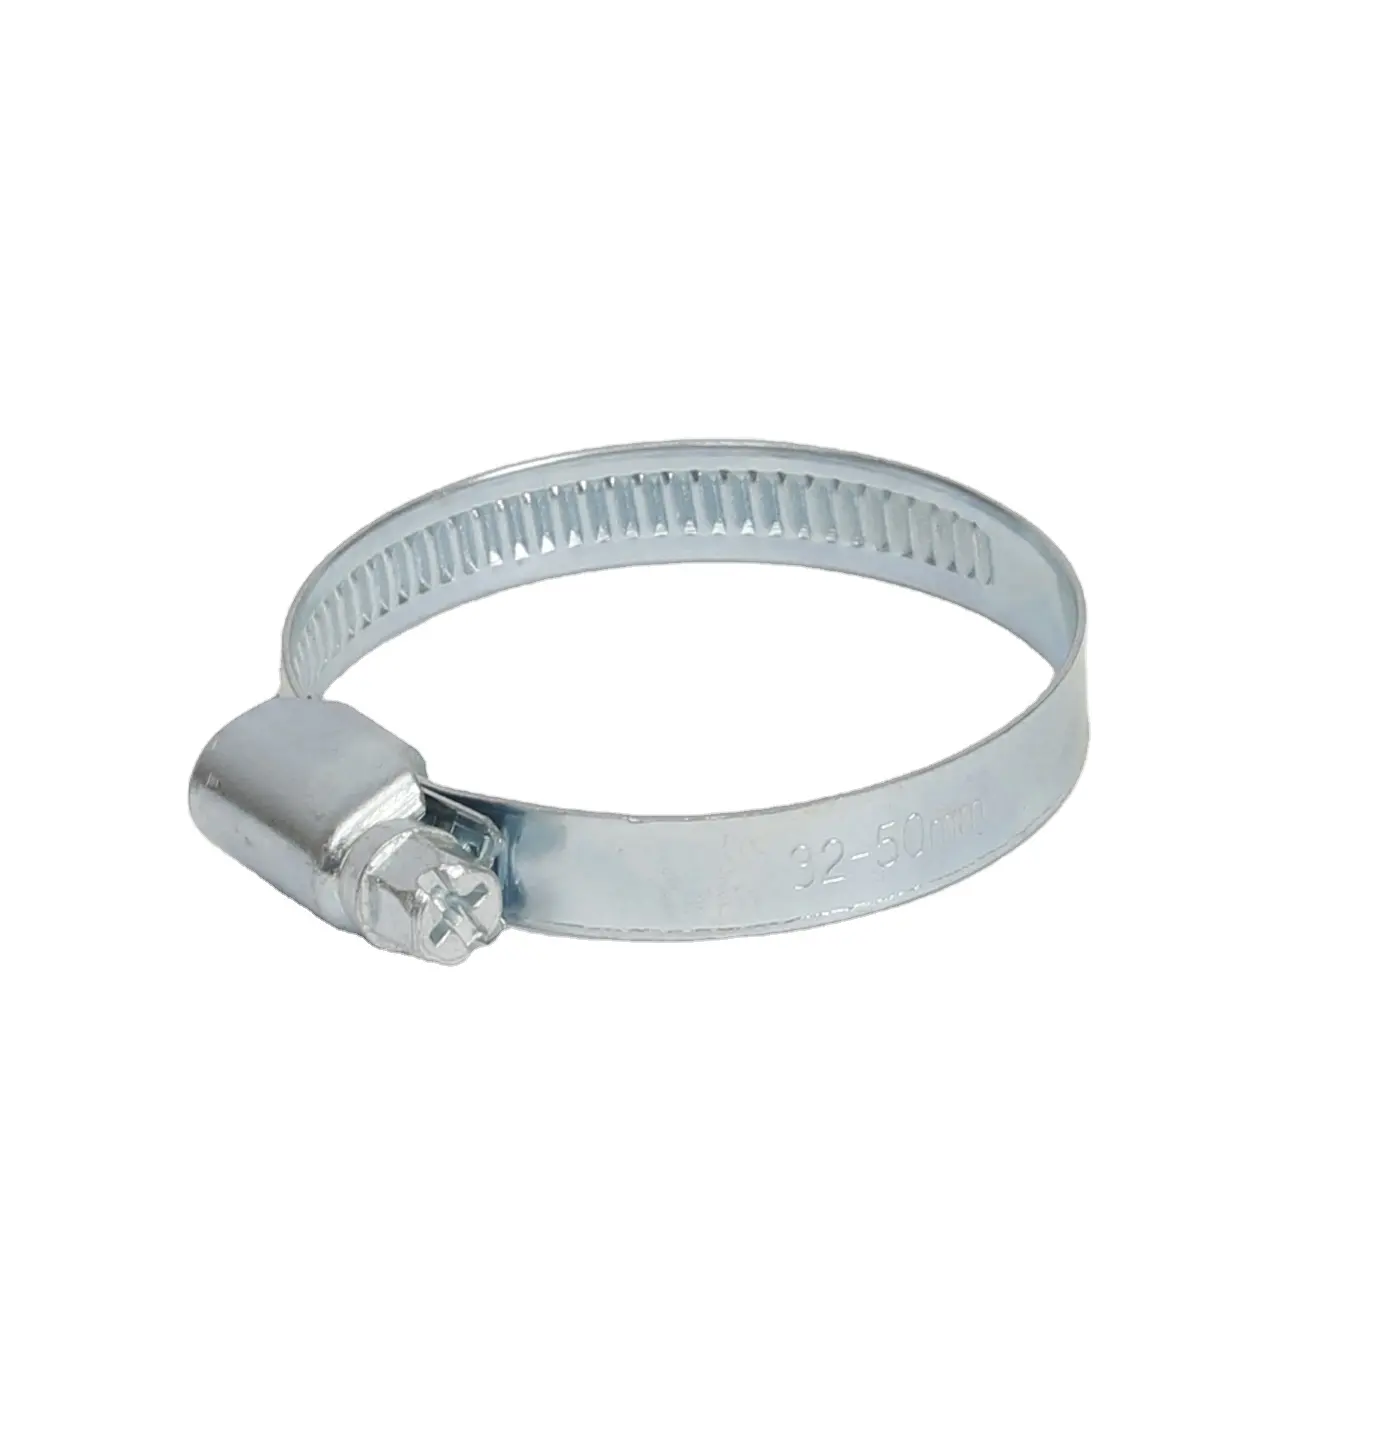 The Most Popular High Voltage German Type Hose Clamp With Worm Gear Drive